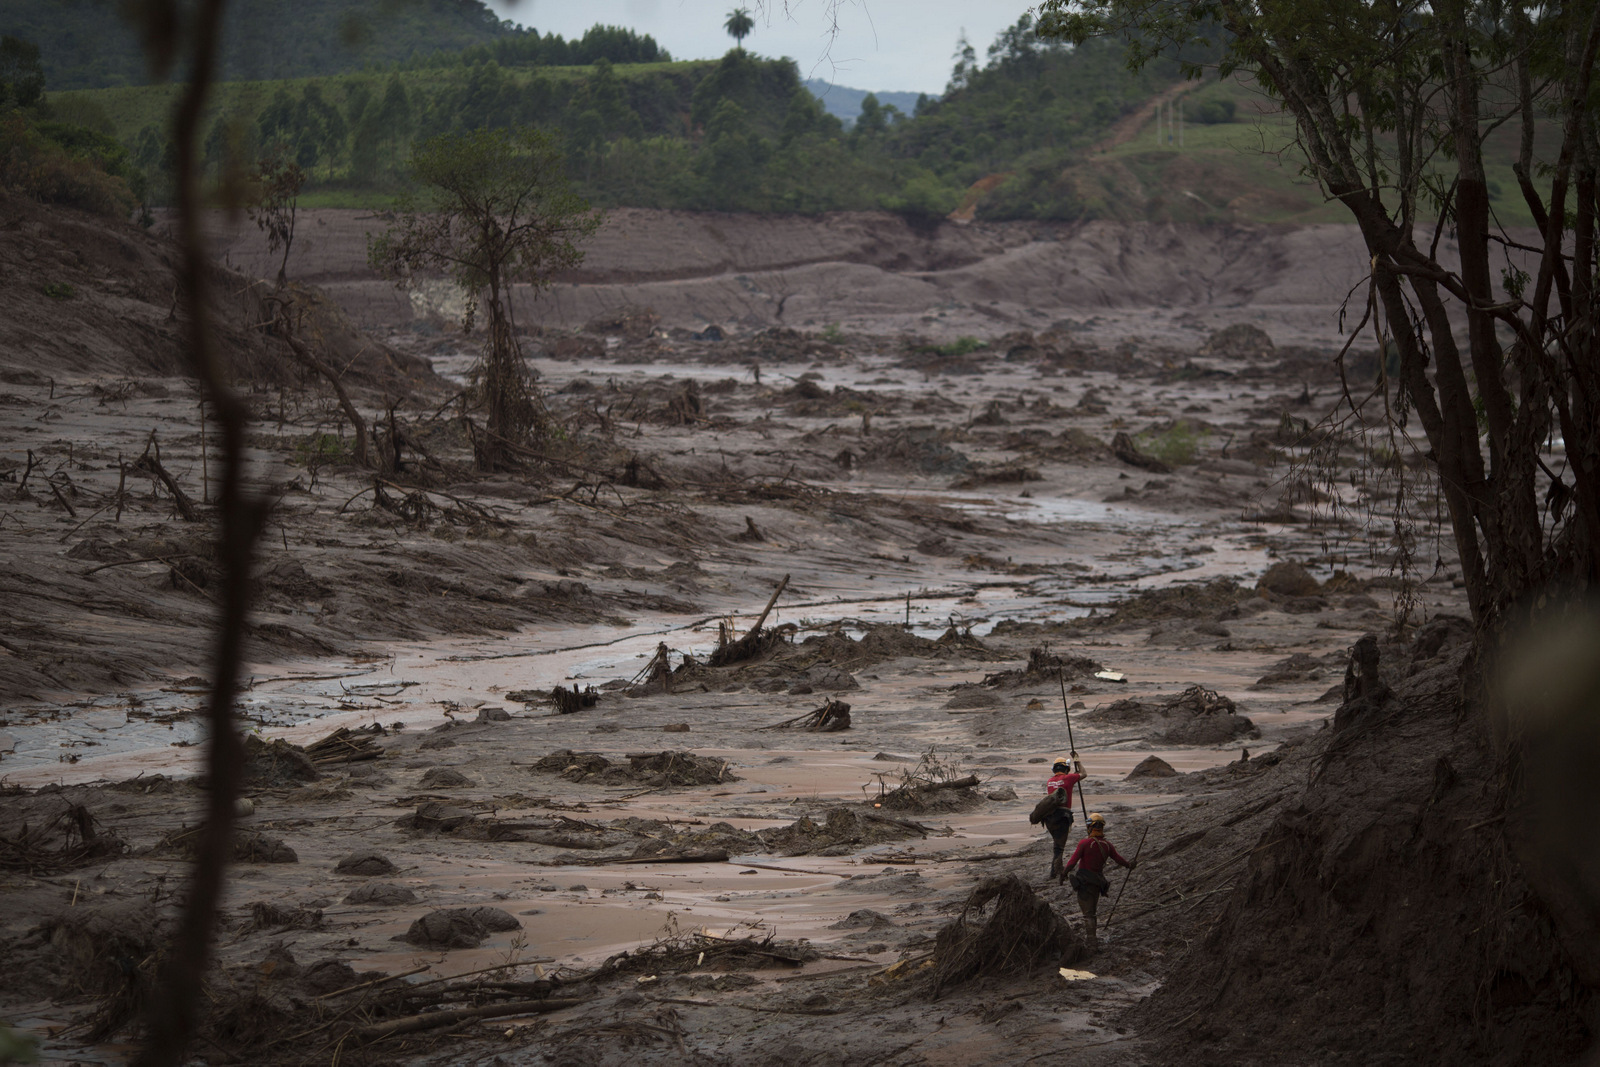 Rescue workers search for victims at the site where the town of Bento Rodrigues stood, after two dams burst in Minas Gerais state, Brazil, Nov. 8, 2015. (AP Photo/Felipe Dana)